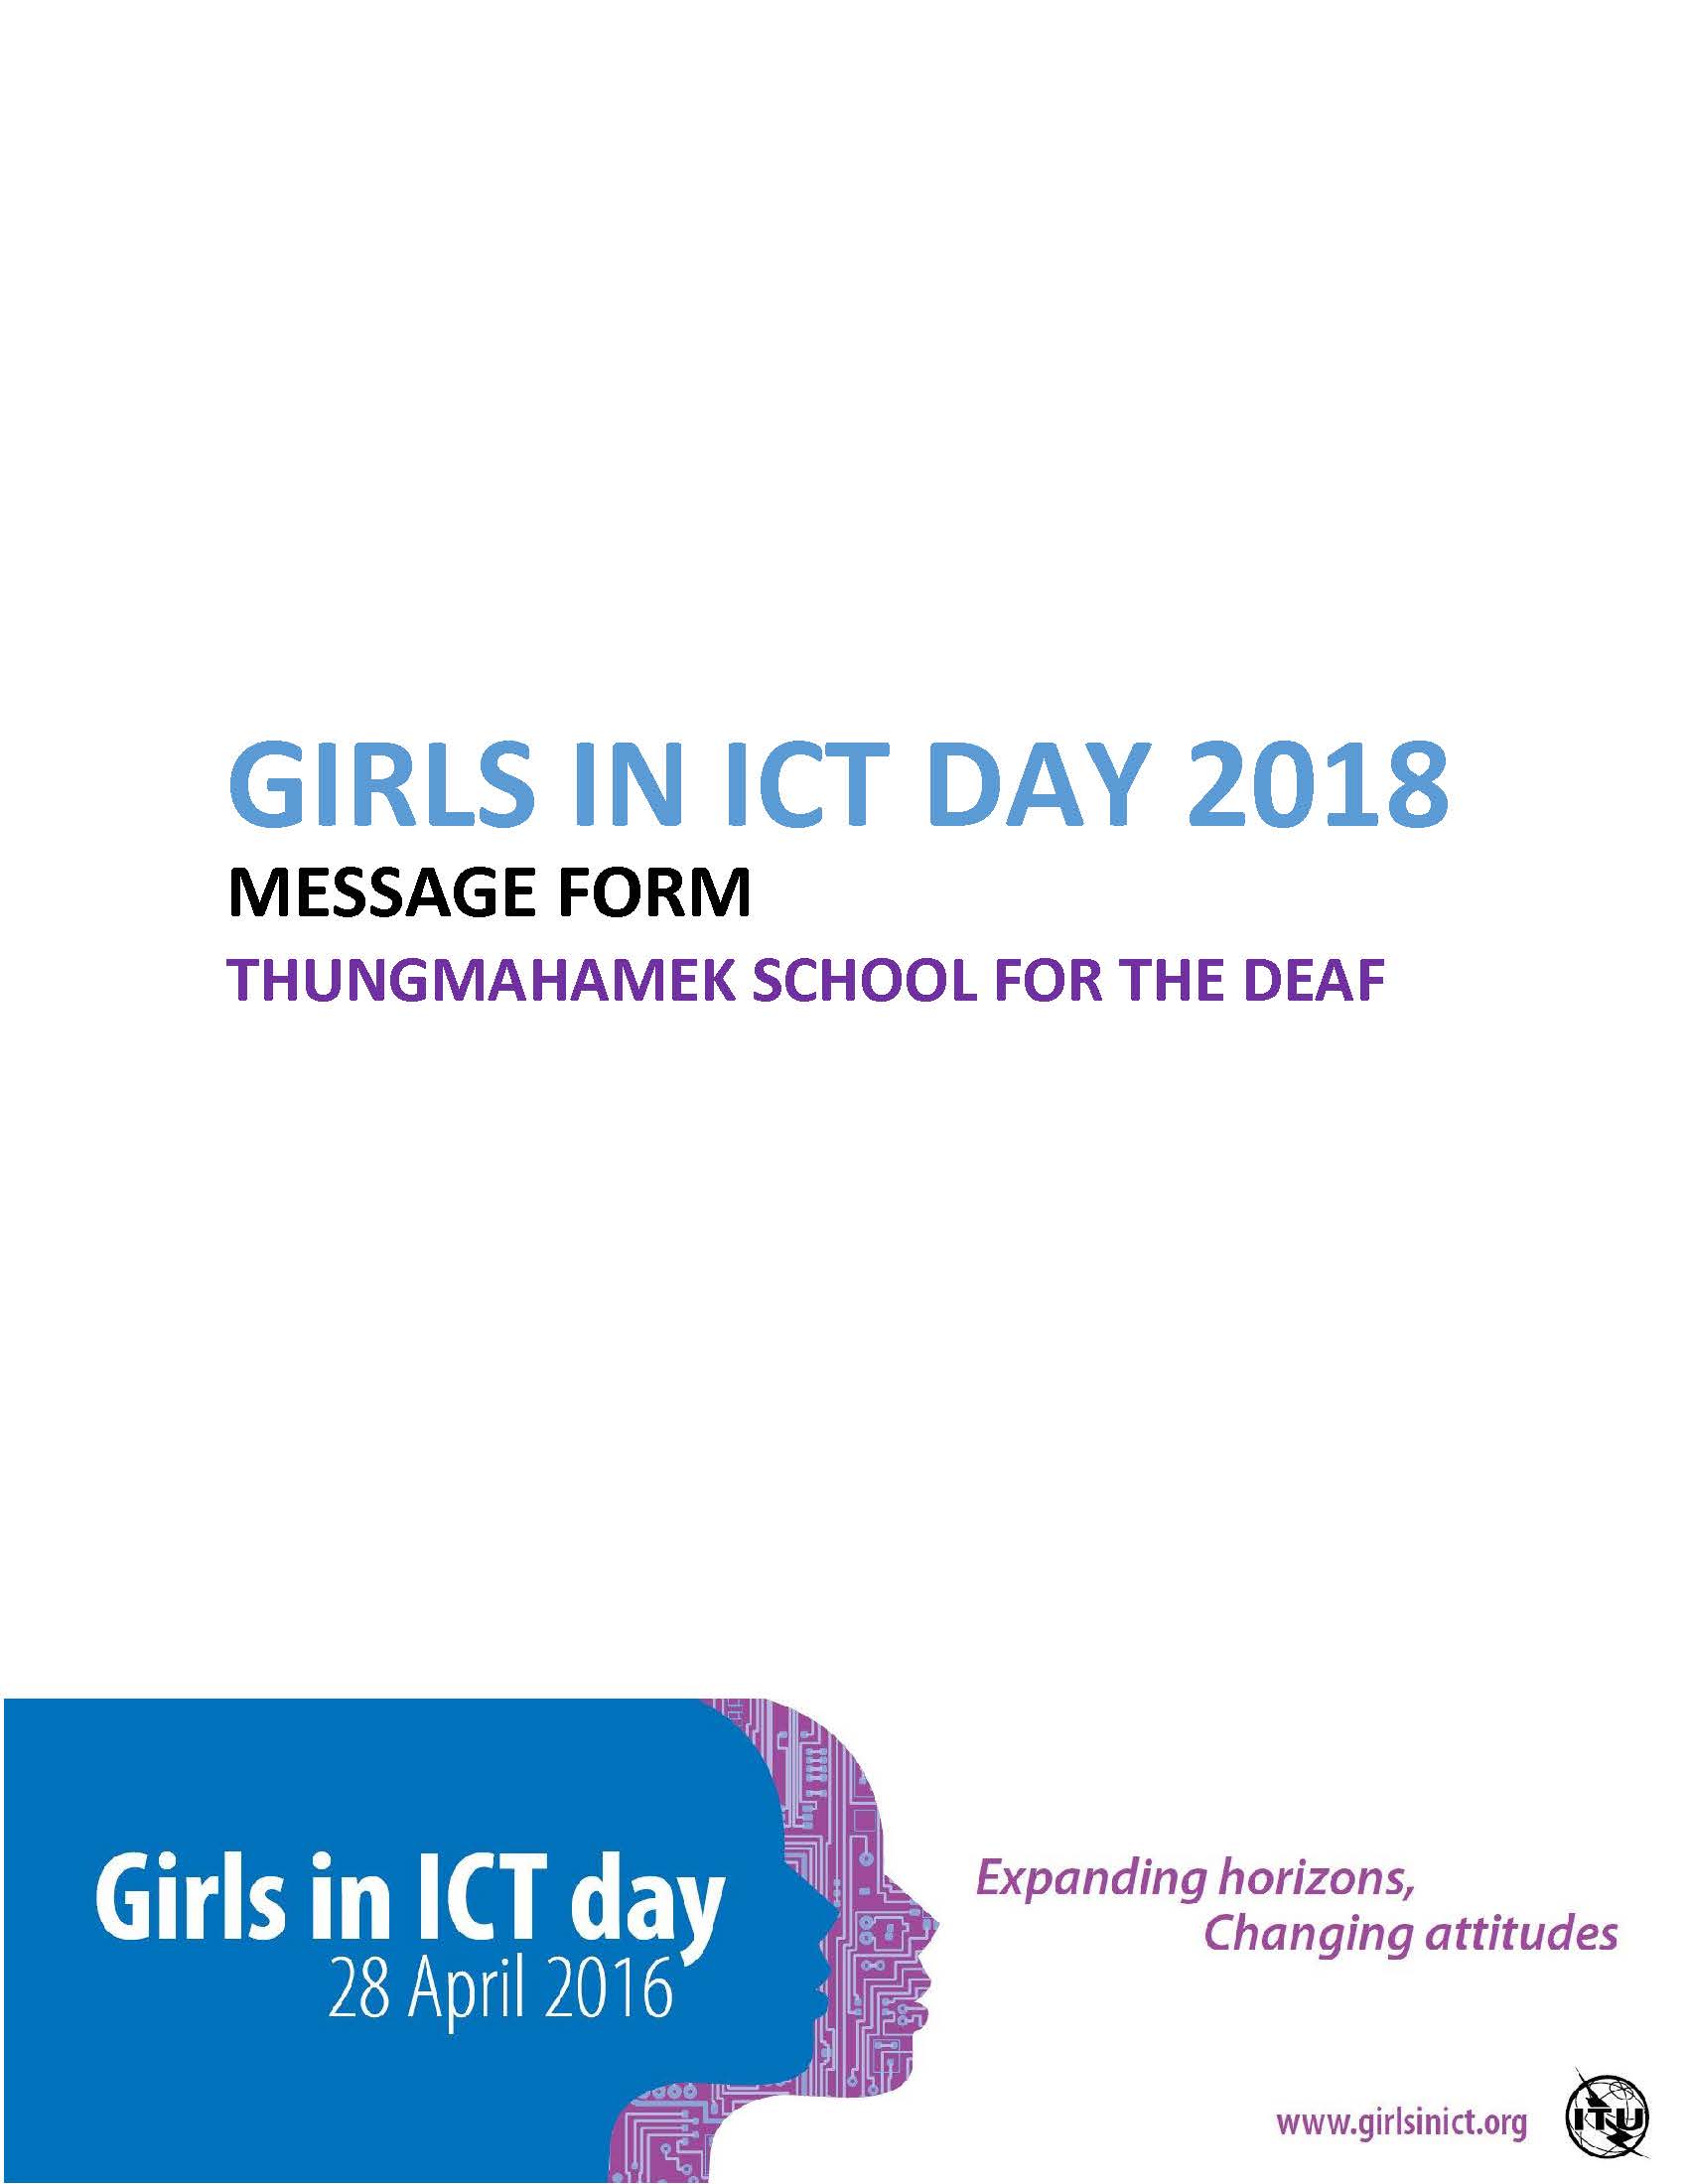 Girls in ICT Day 2018: Message form Thungmahamek school for the deaf